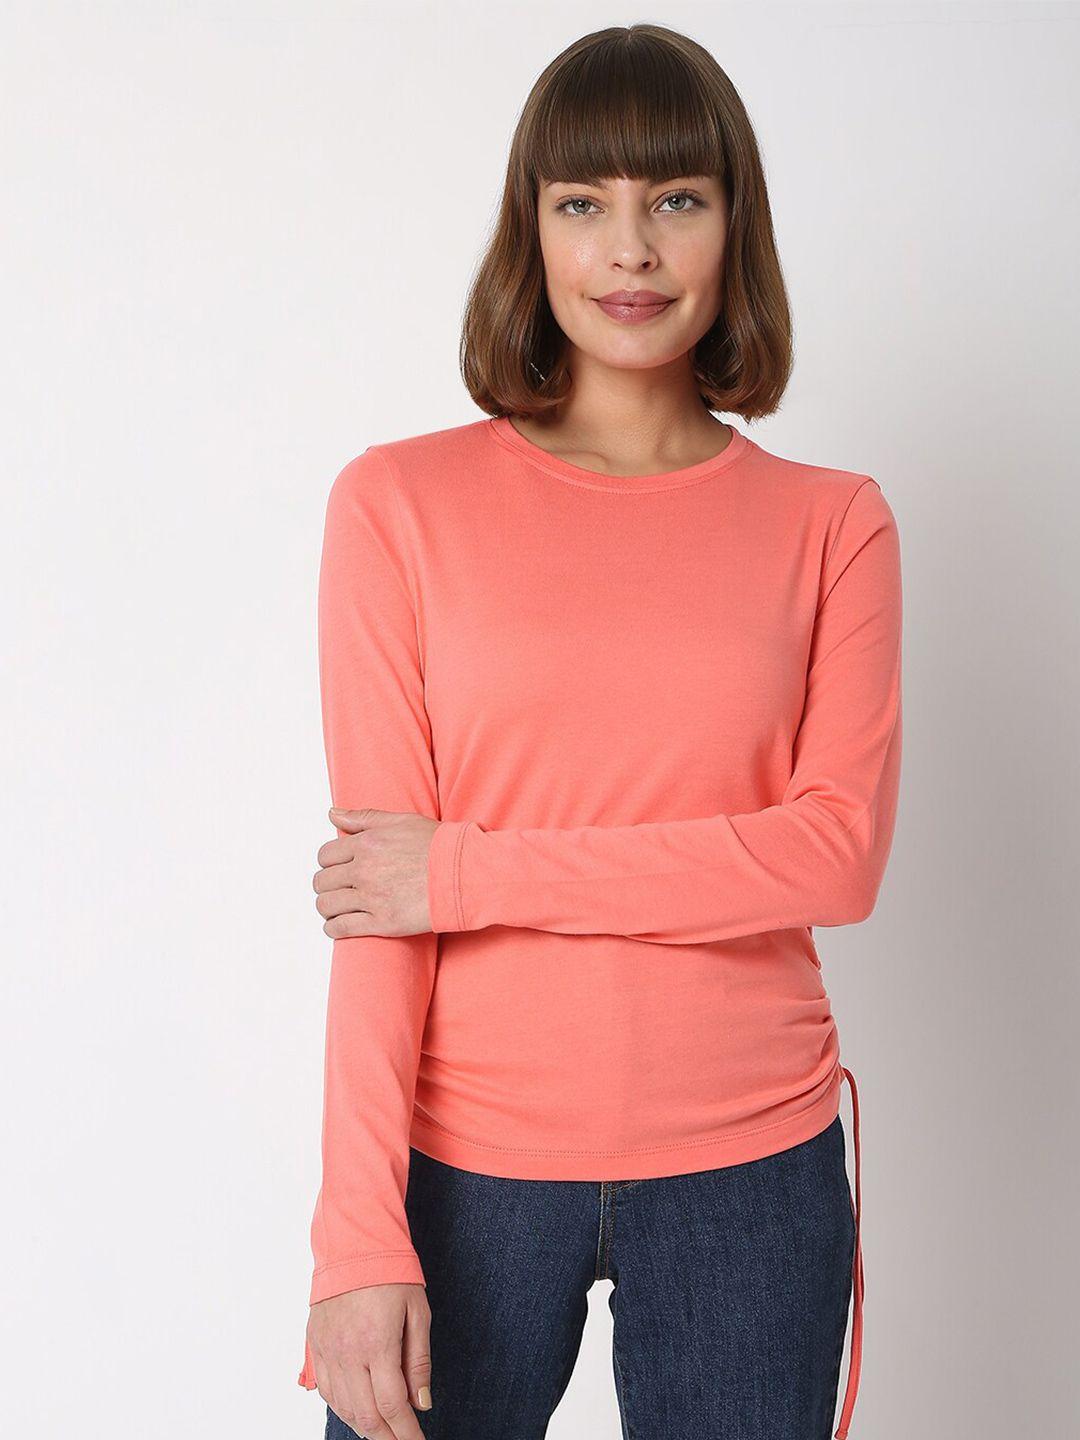 vero-moda-women-coral-full-sleeves-cotton-t-shirt-with-side-string